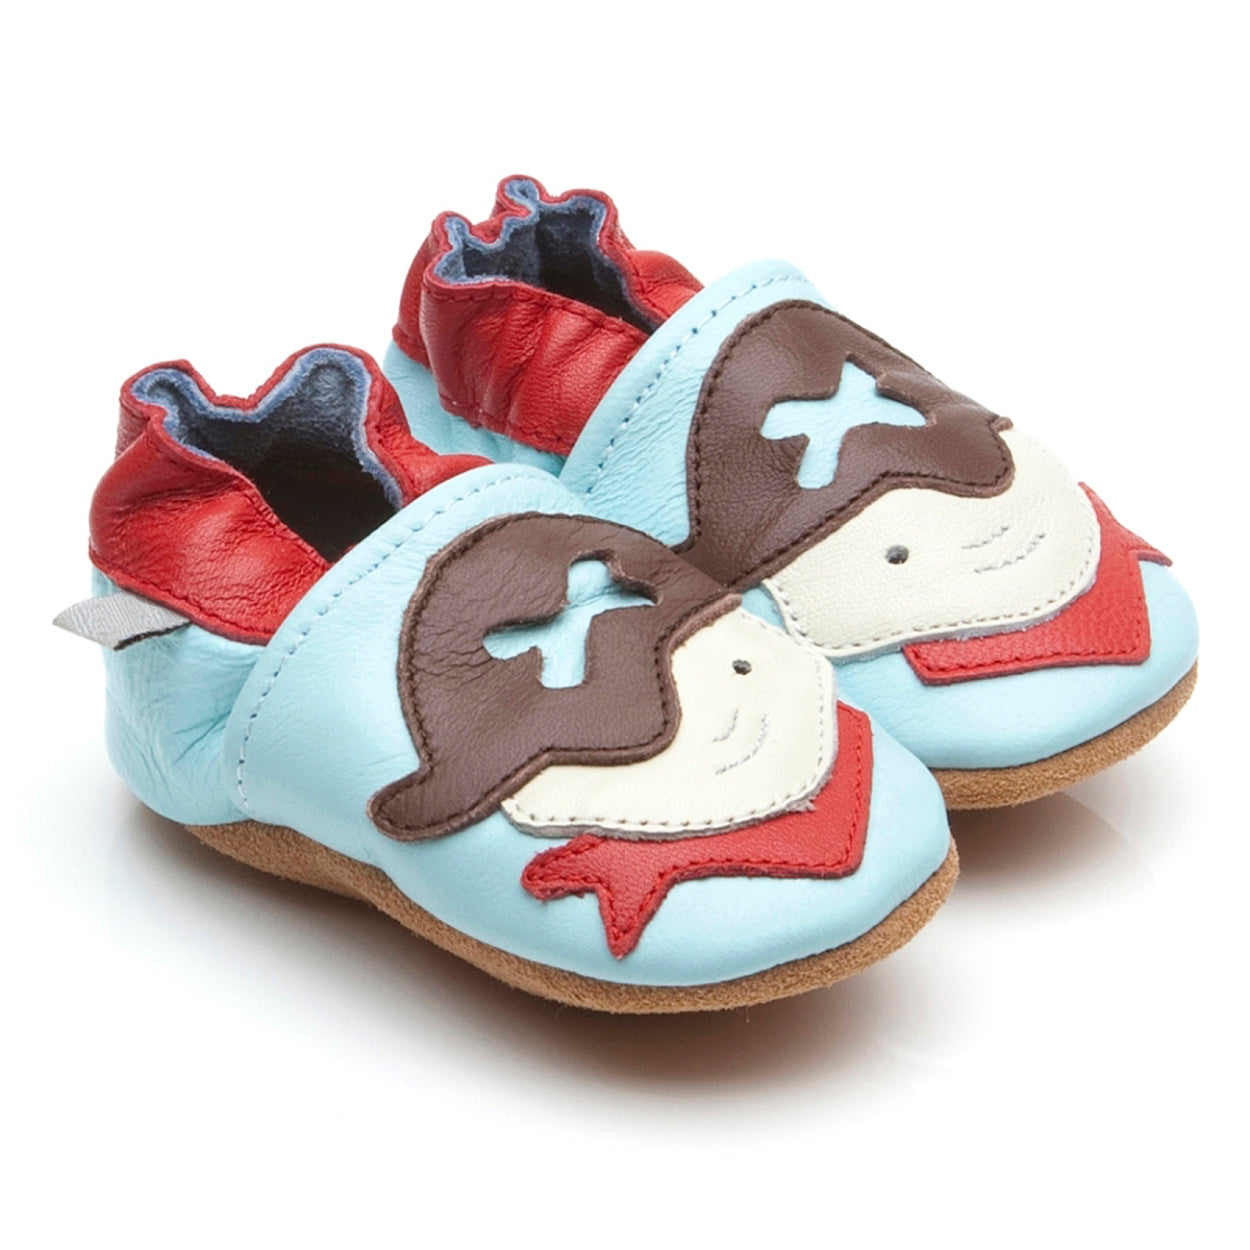 Soft Leather Baby Shoes Pirate